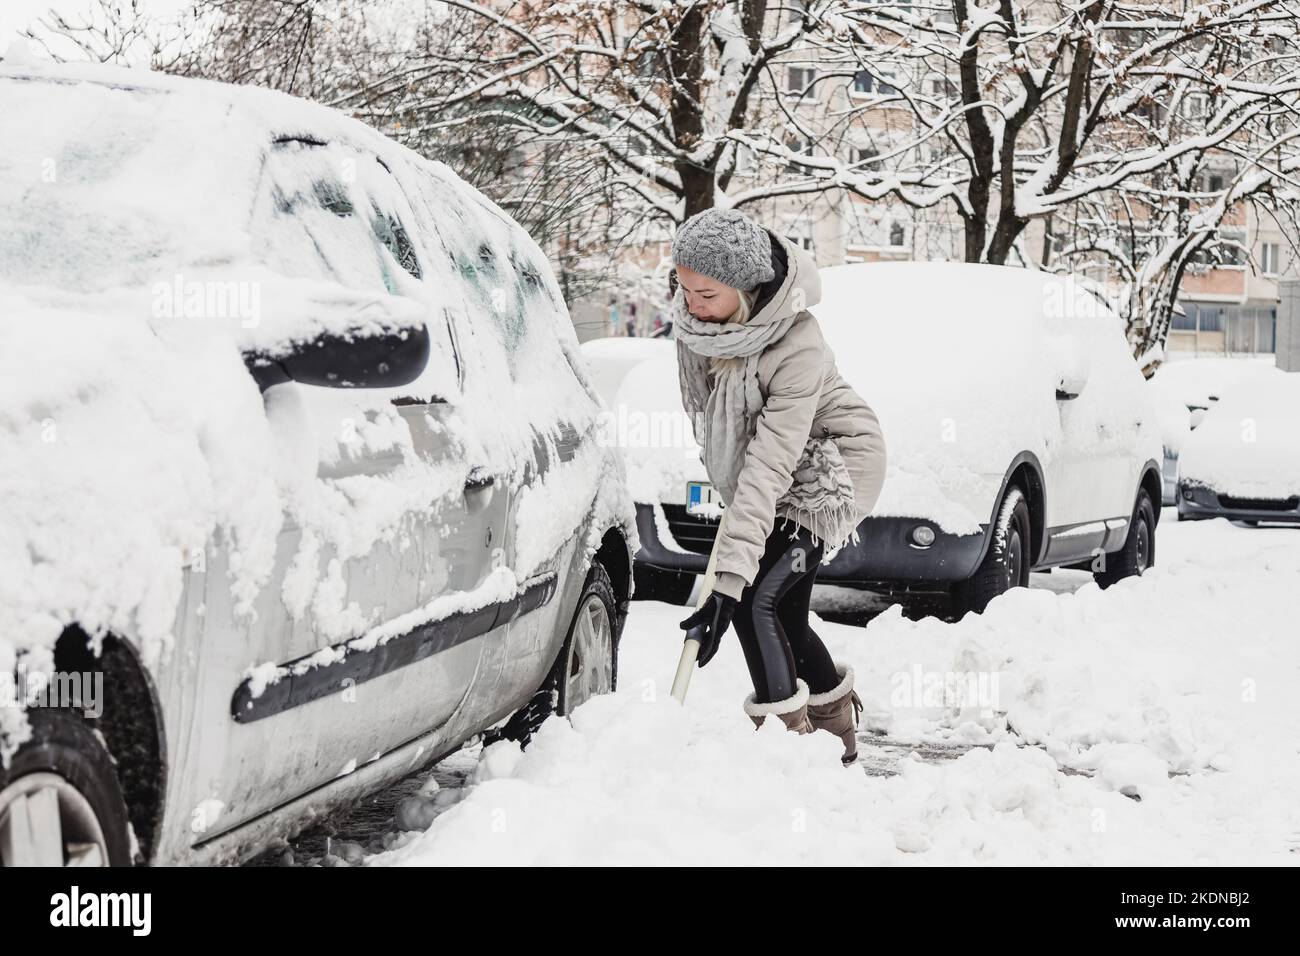 Independent woman shoveling her parking lot after a winter snowstorm. Stock Photo